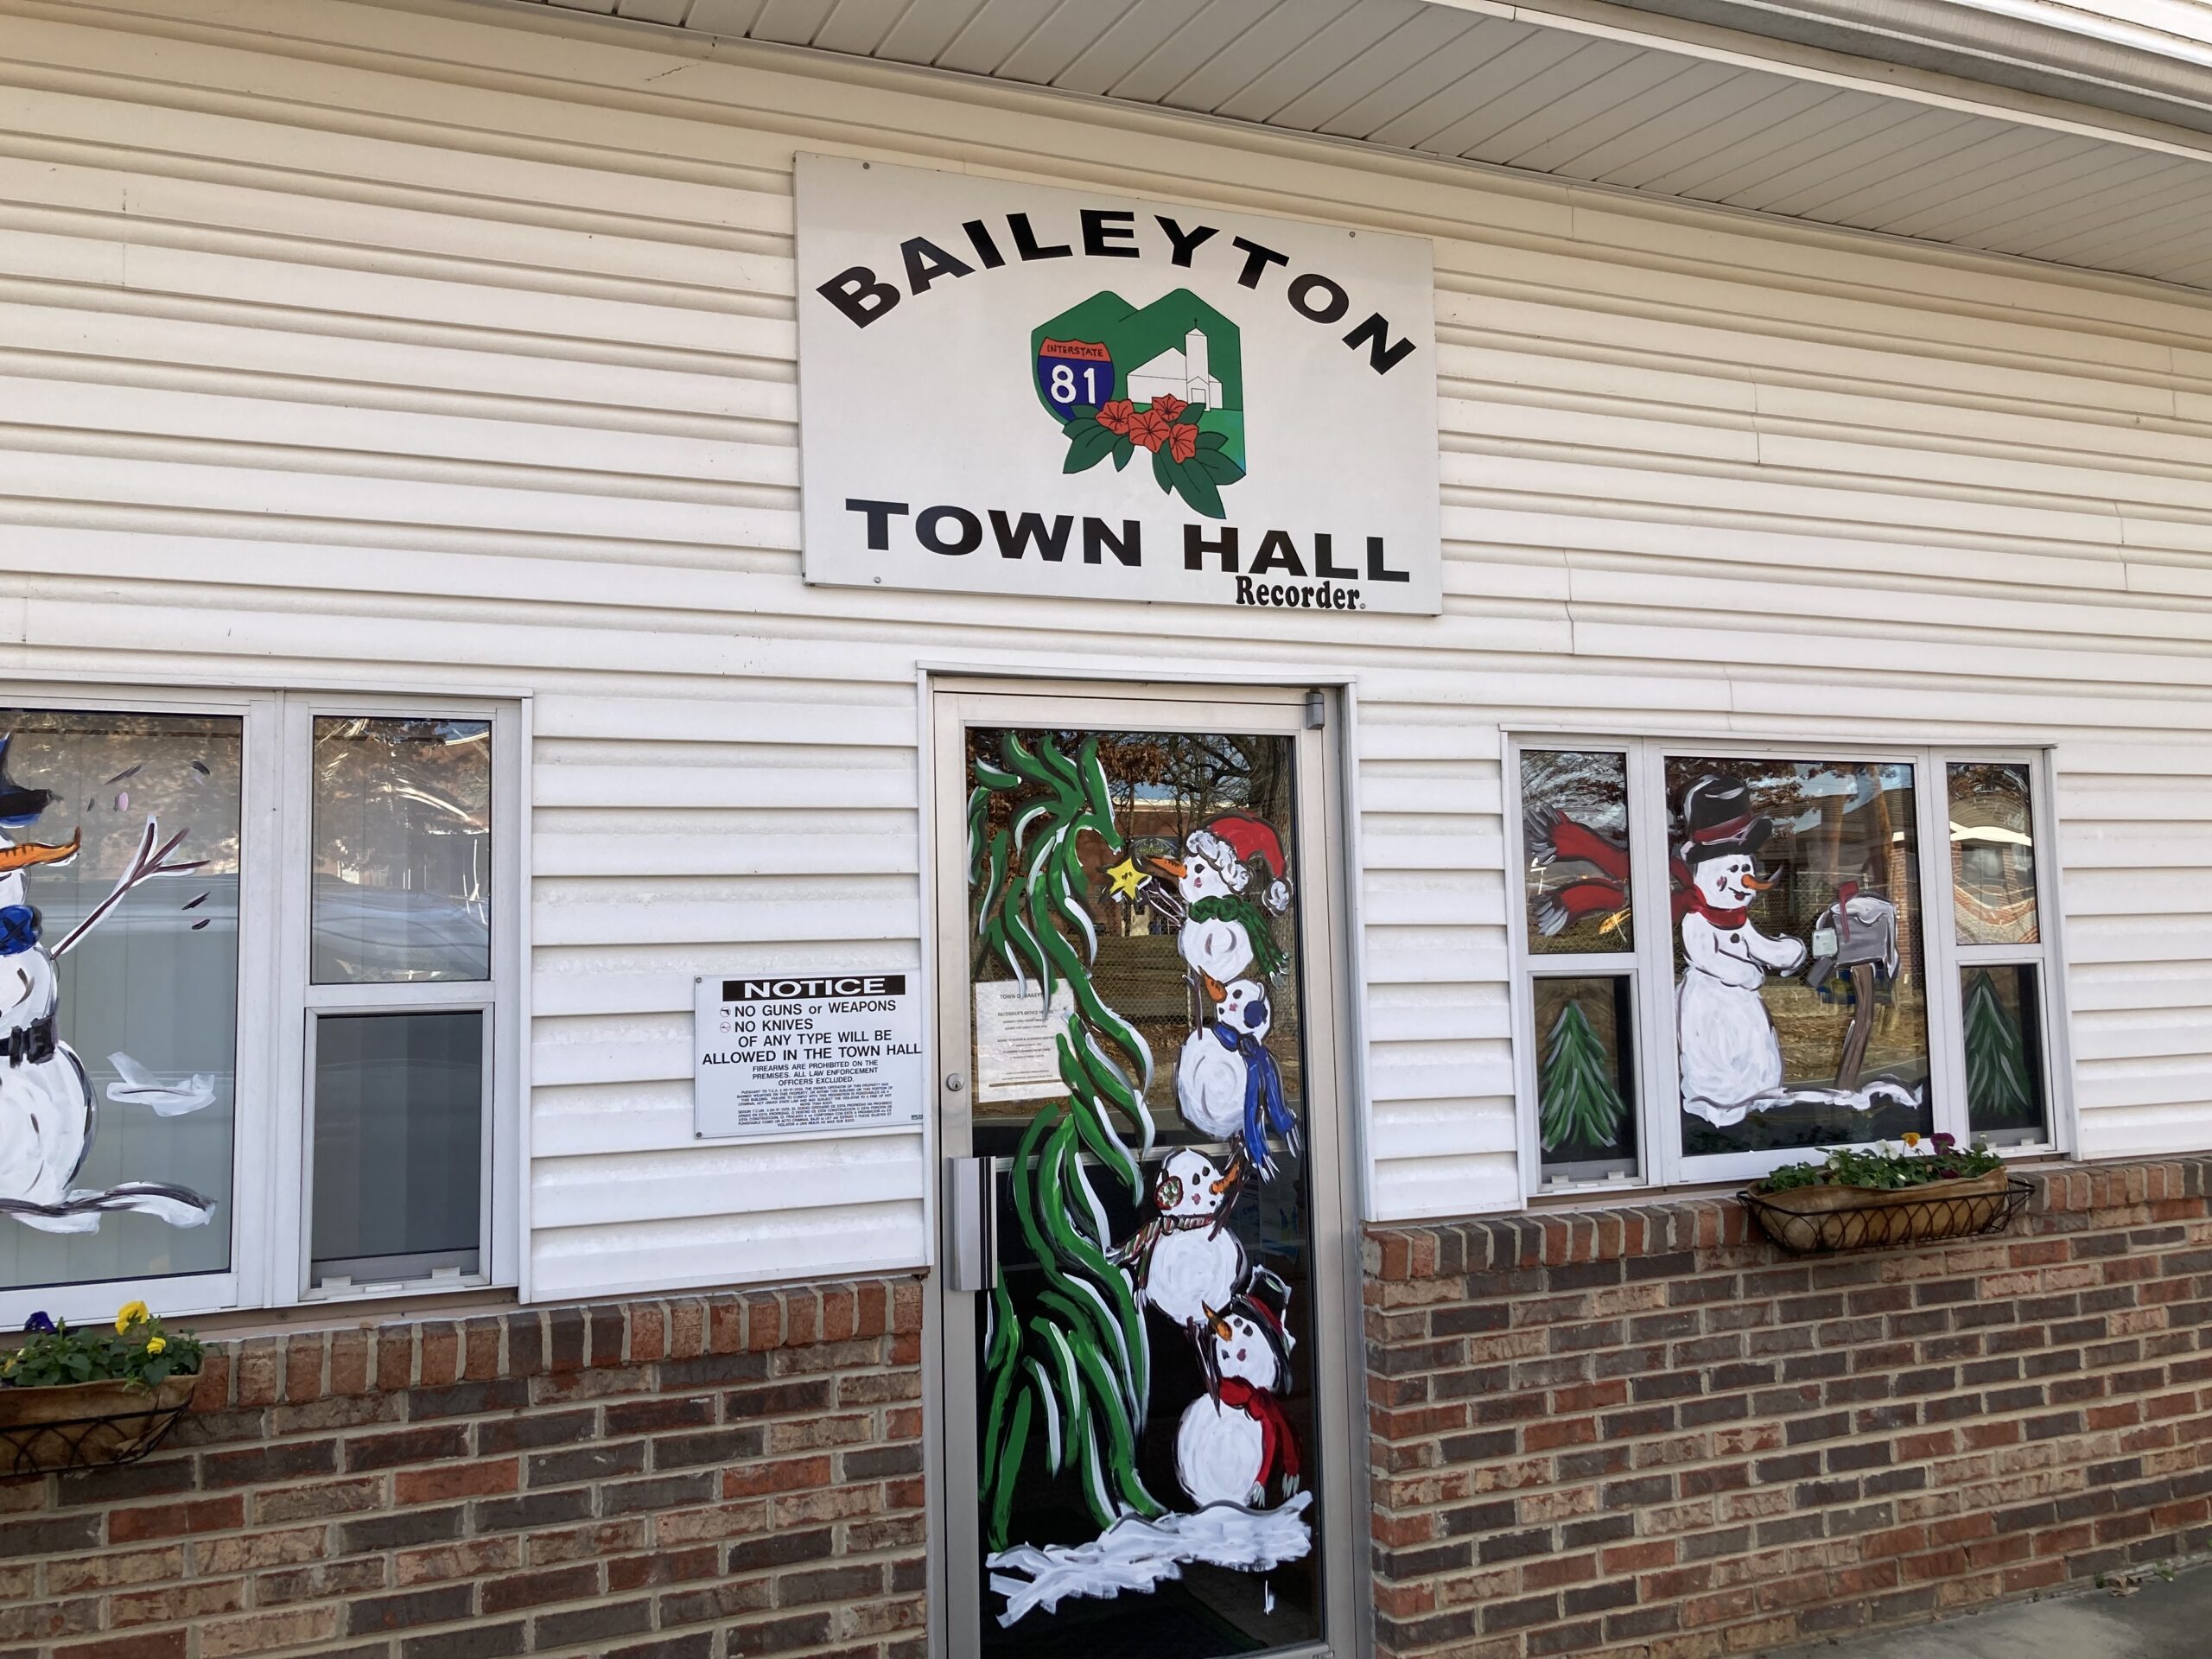 Baileyton Planning Commission Meeting Cancelled